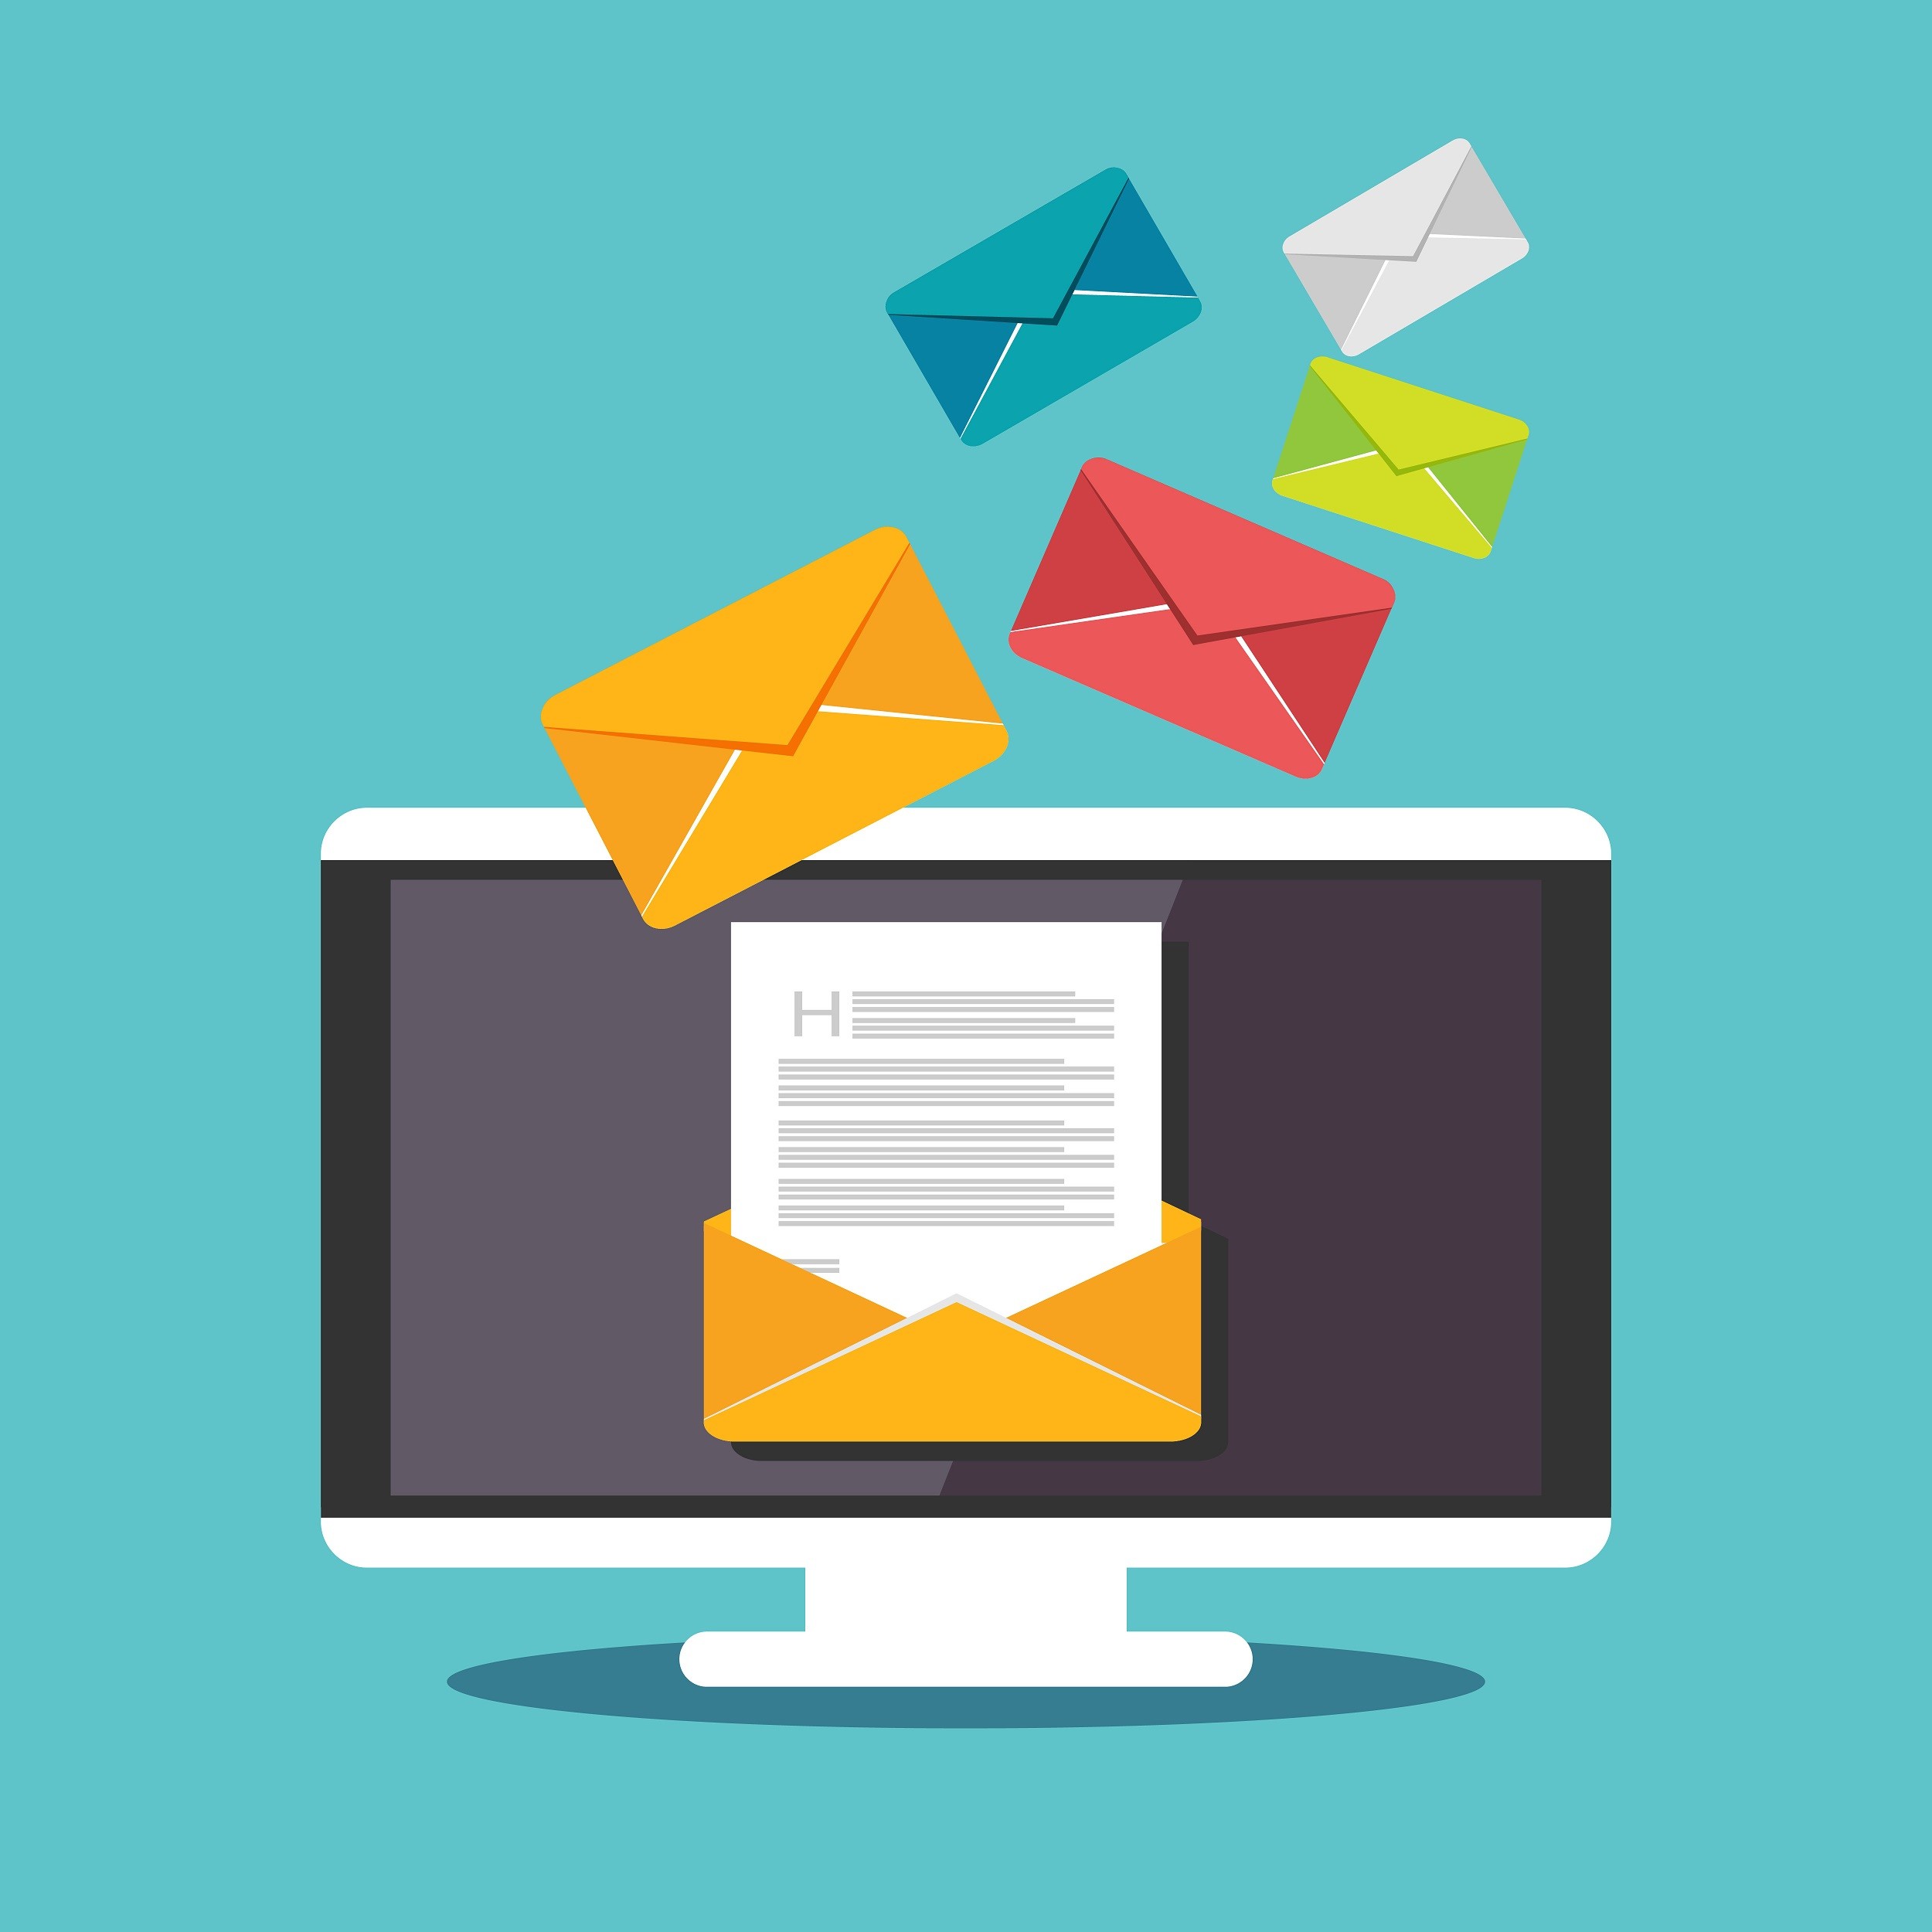 Email marketing - do more than you are comfortable with